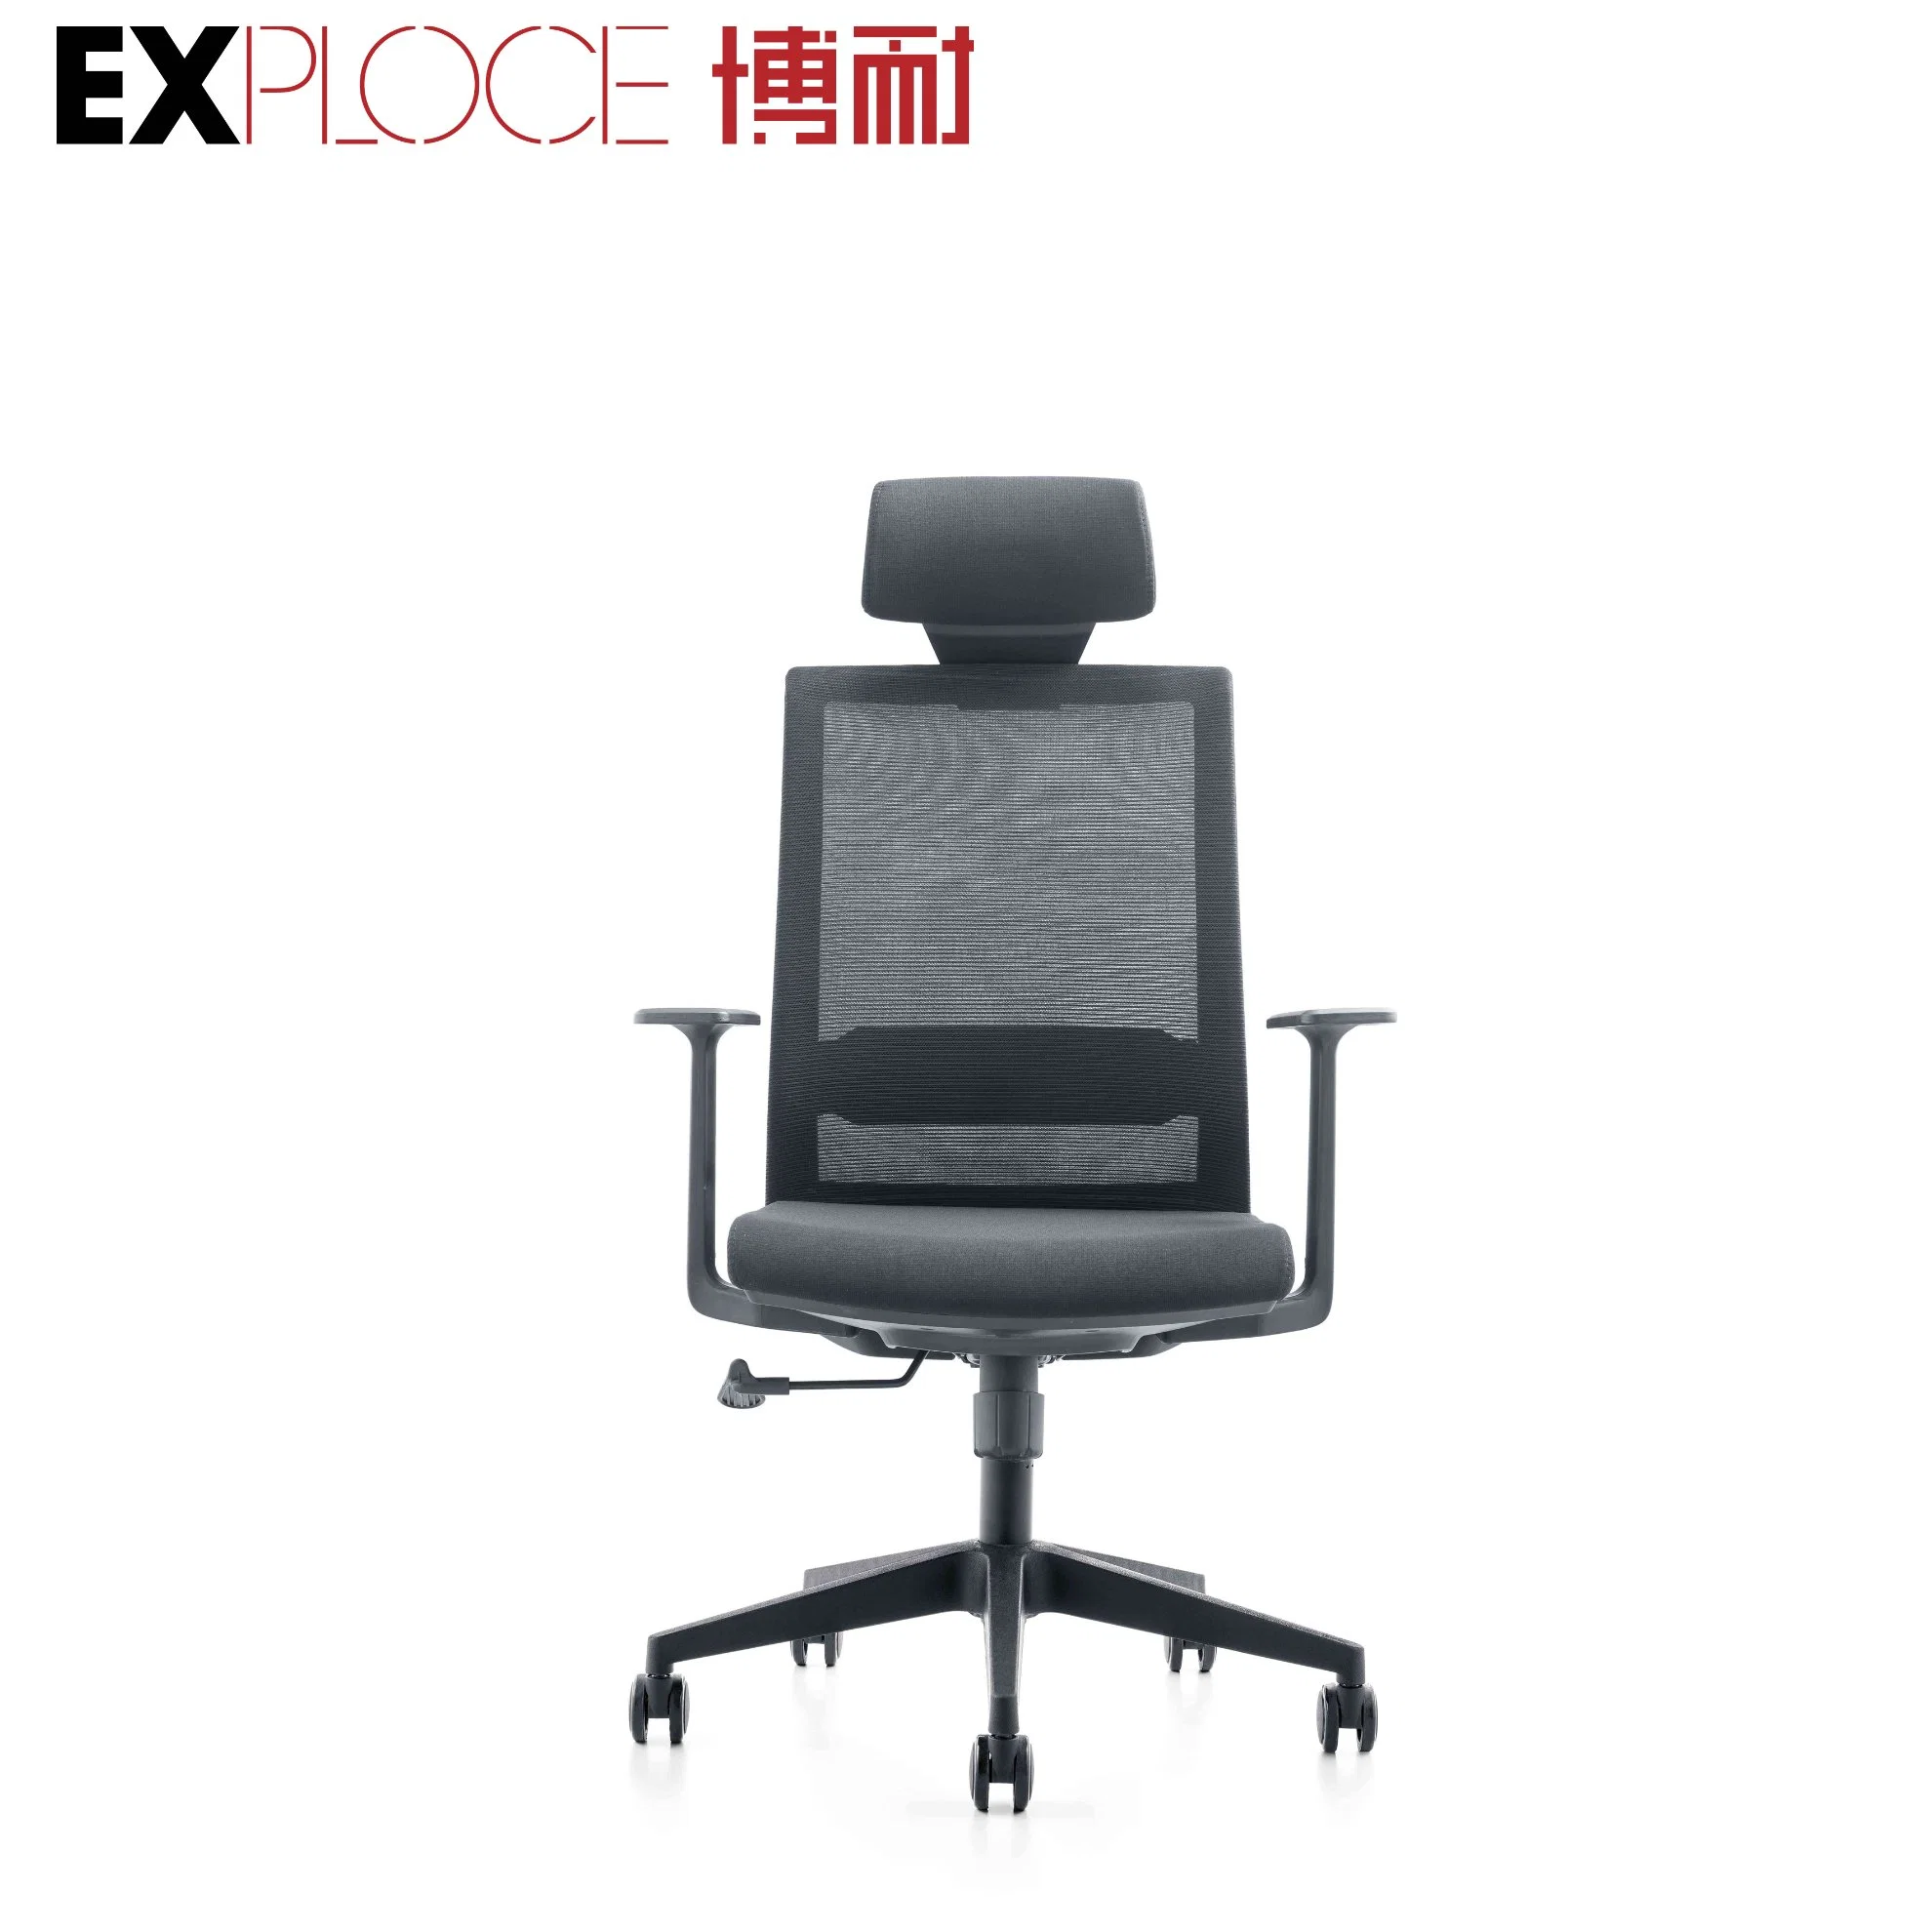 Executive Ergonomic New Swivel High Back Mesh Manager Office Chair with Headrest and Lumbar Support